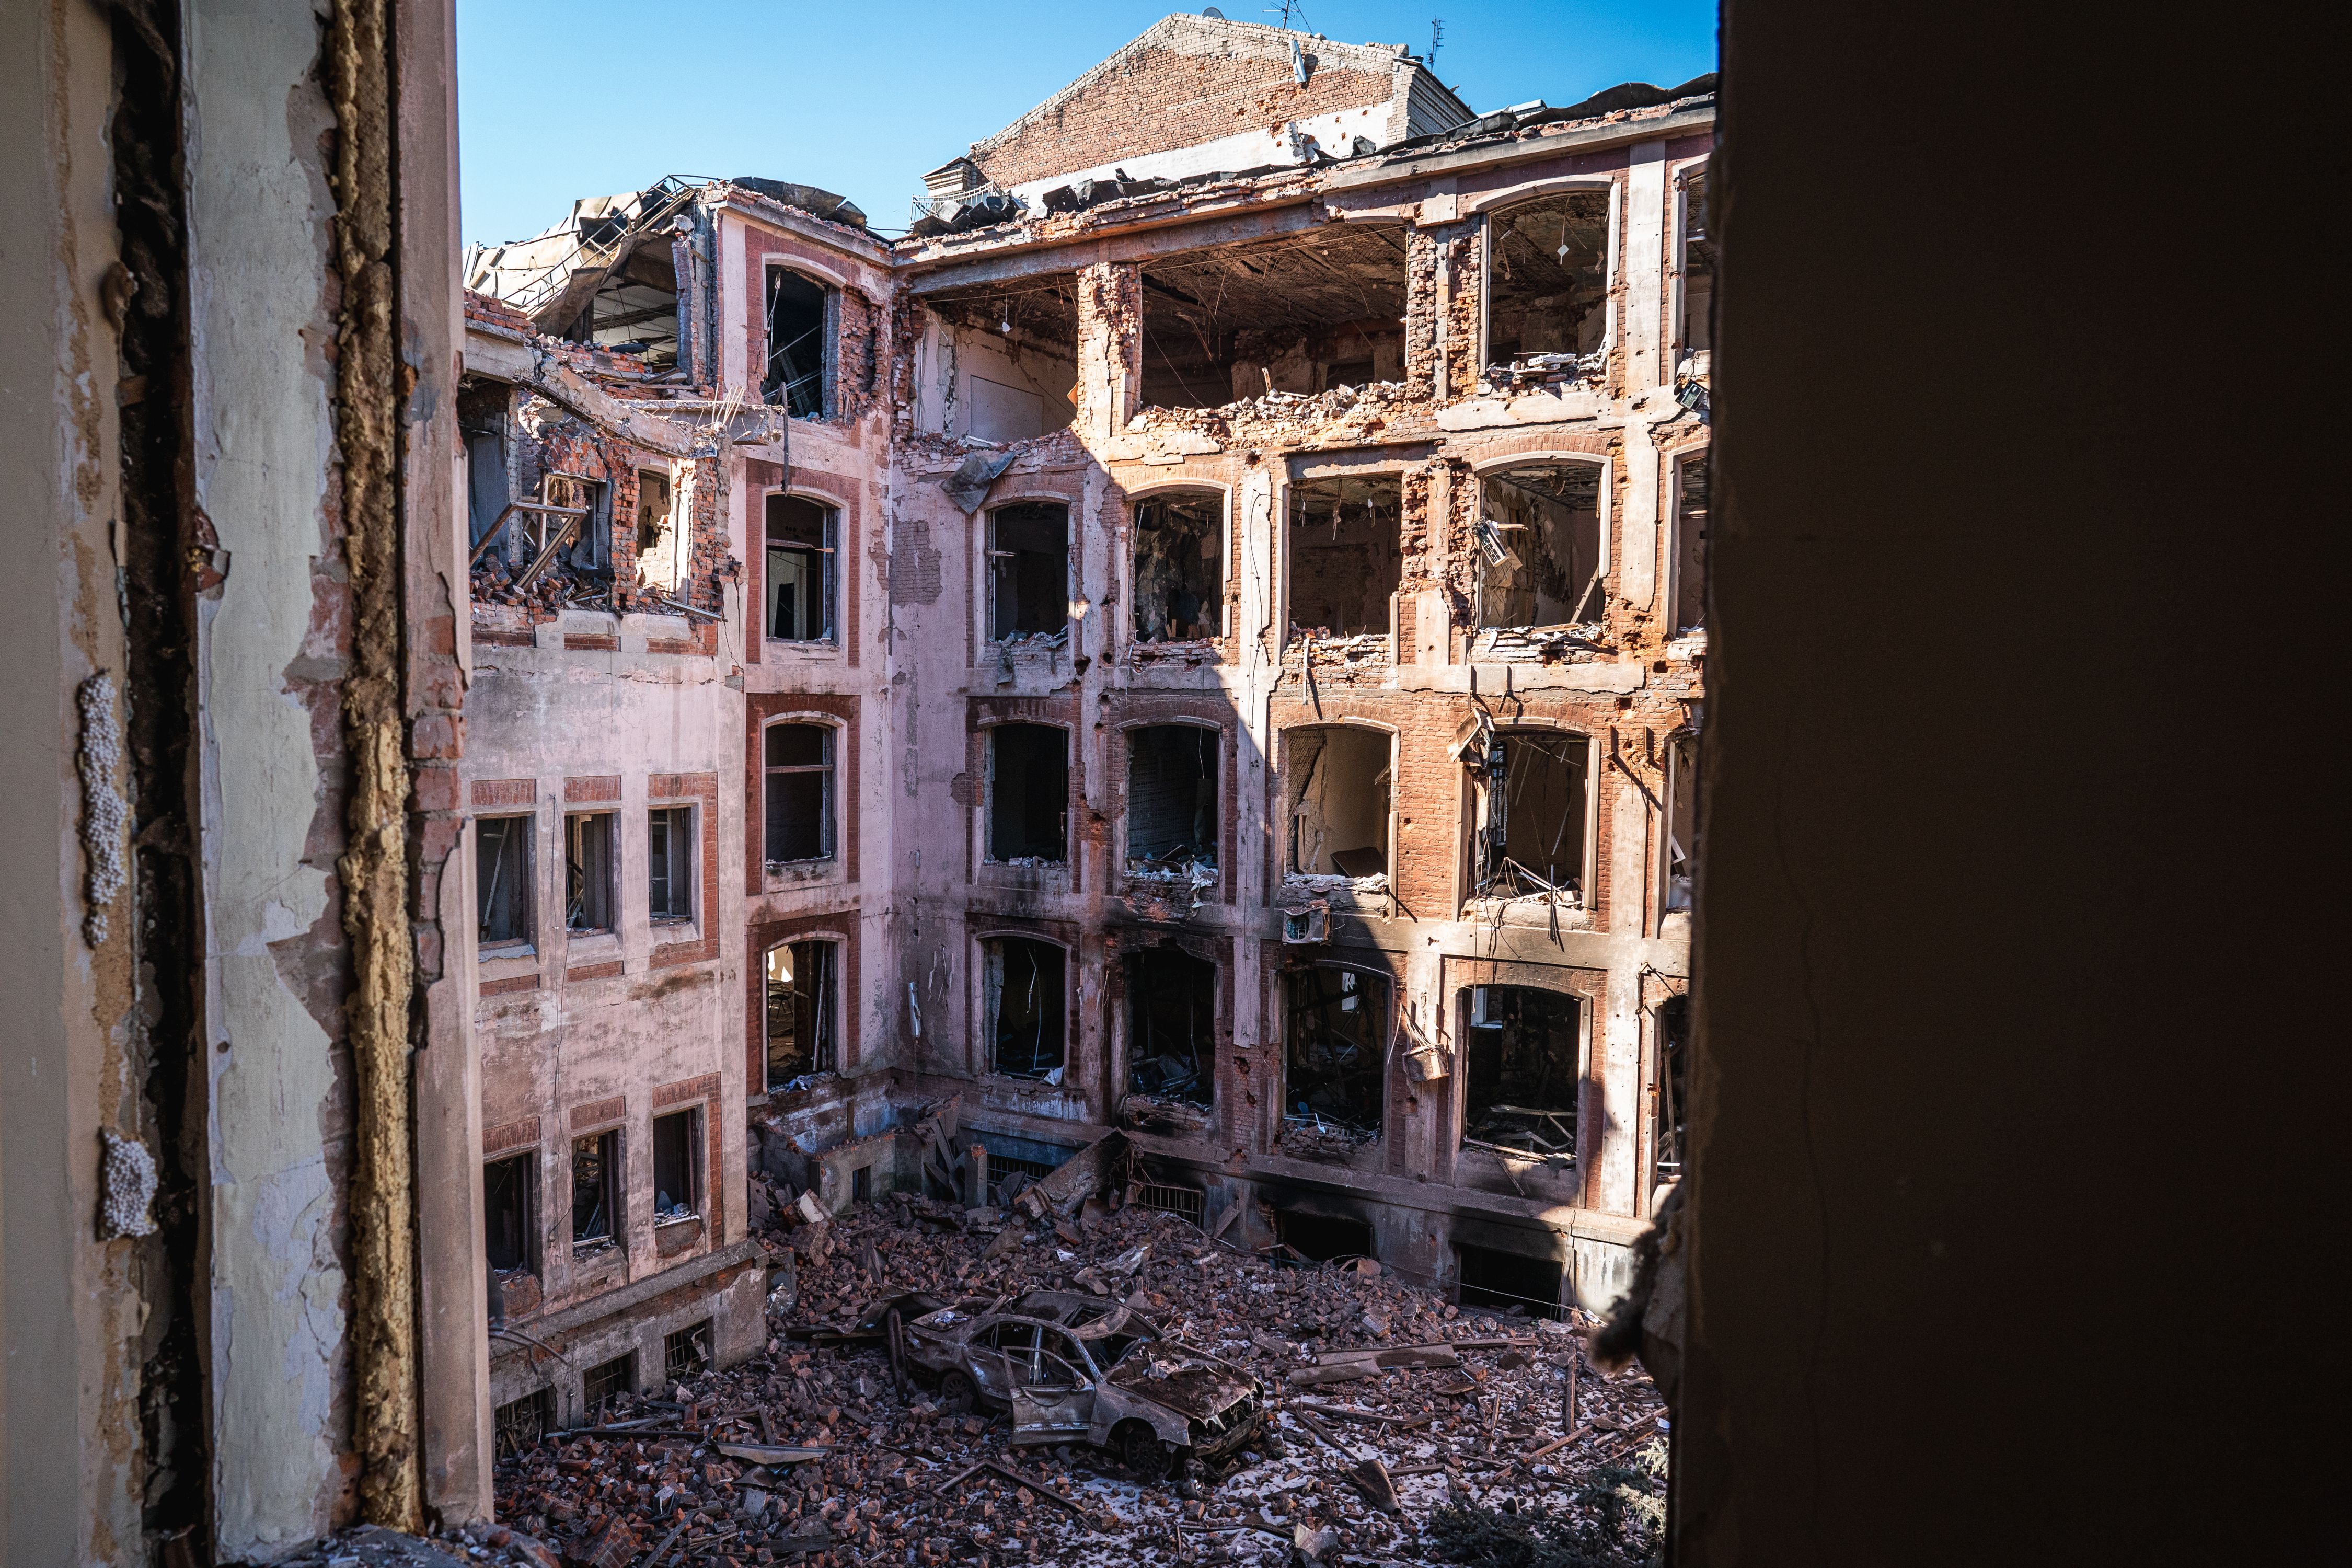  A view from a heavily damaged building after Russian attacks in Kharkiv, Ukraine on March 22.